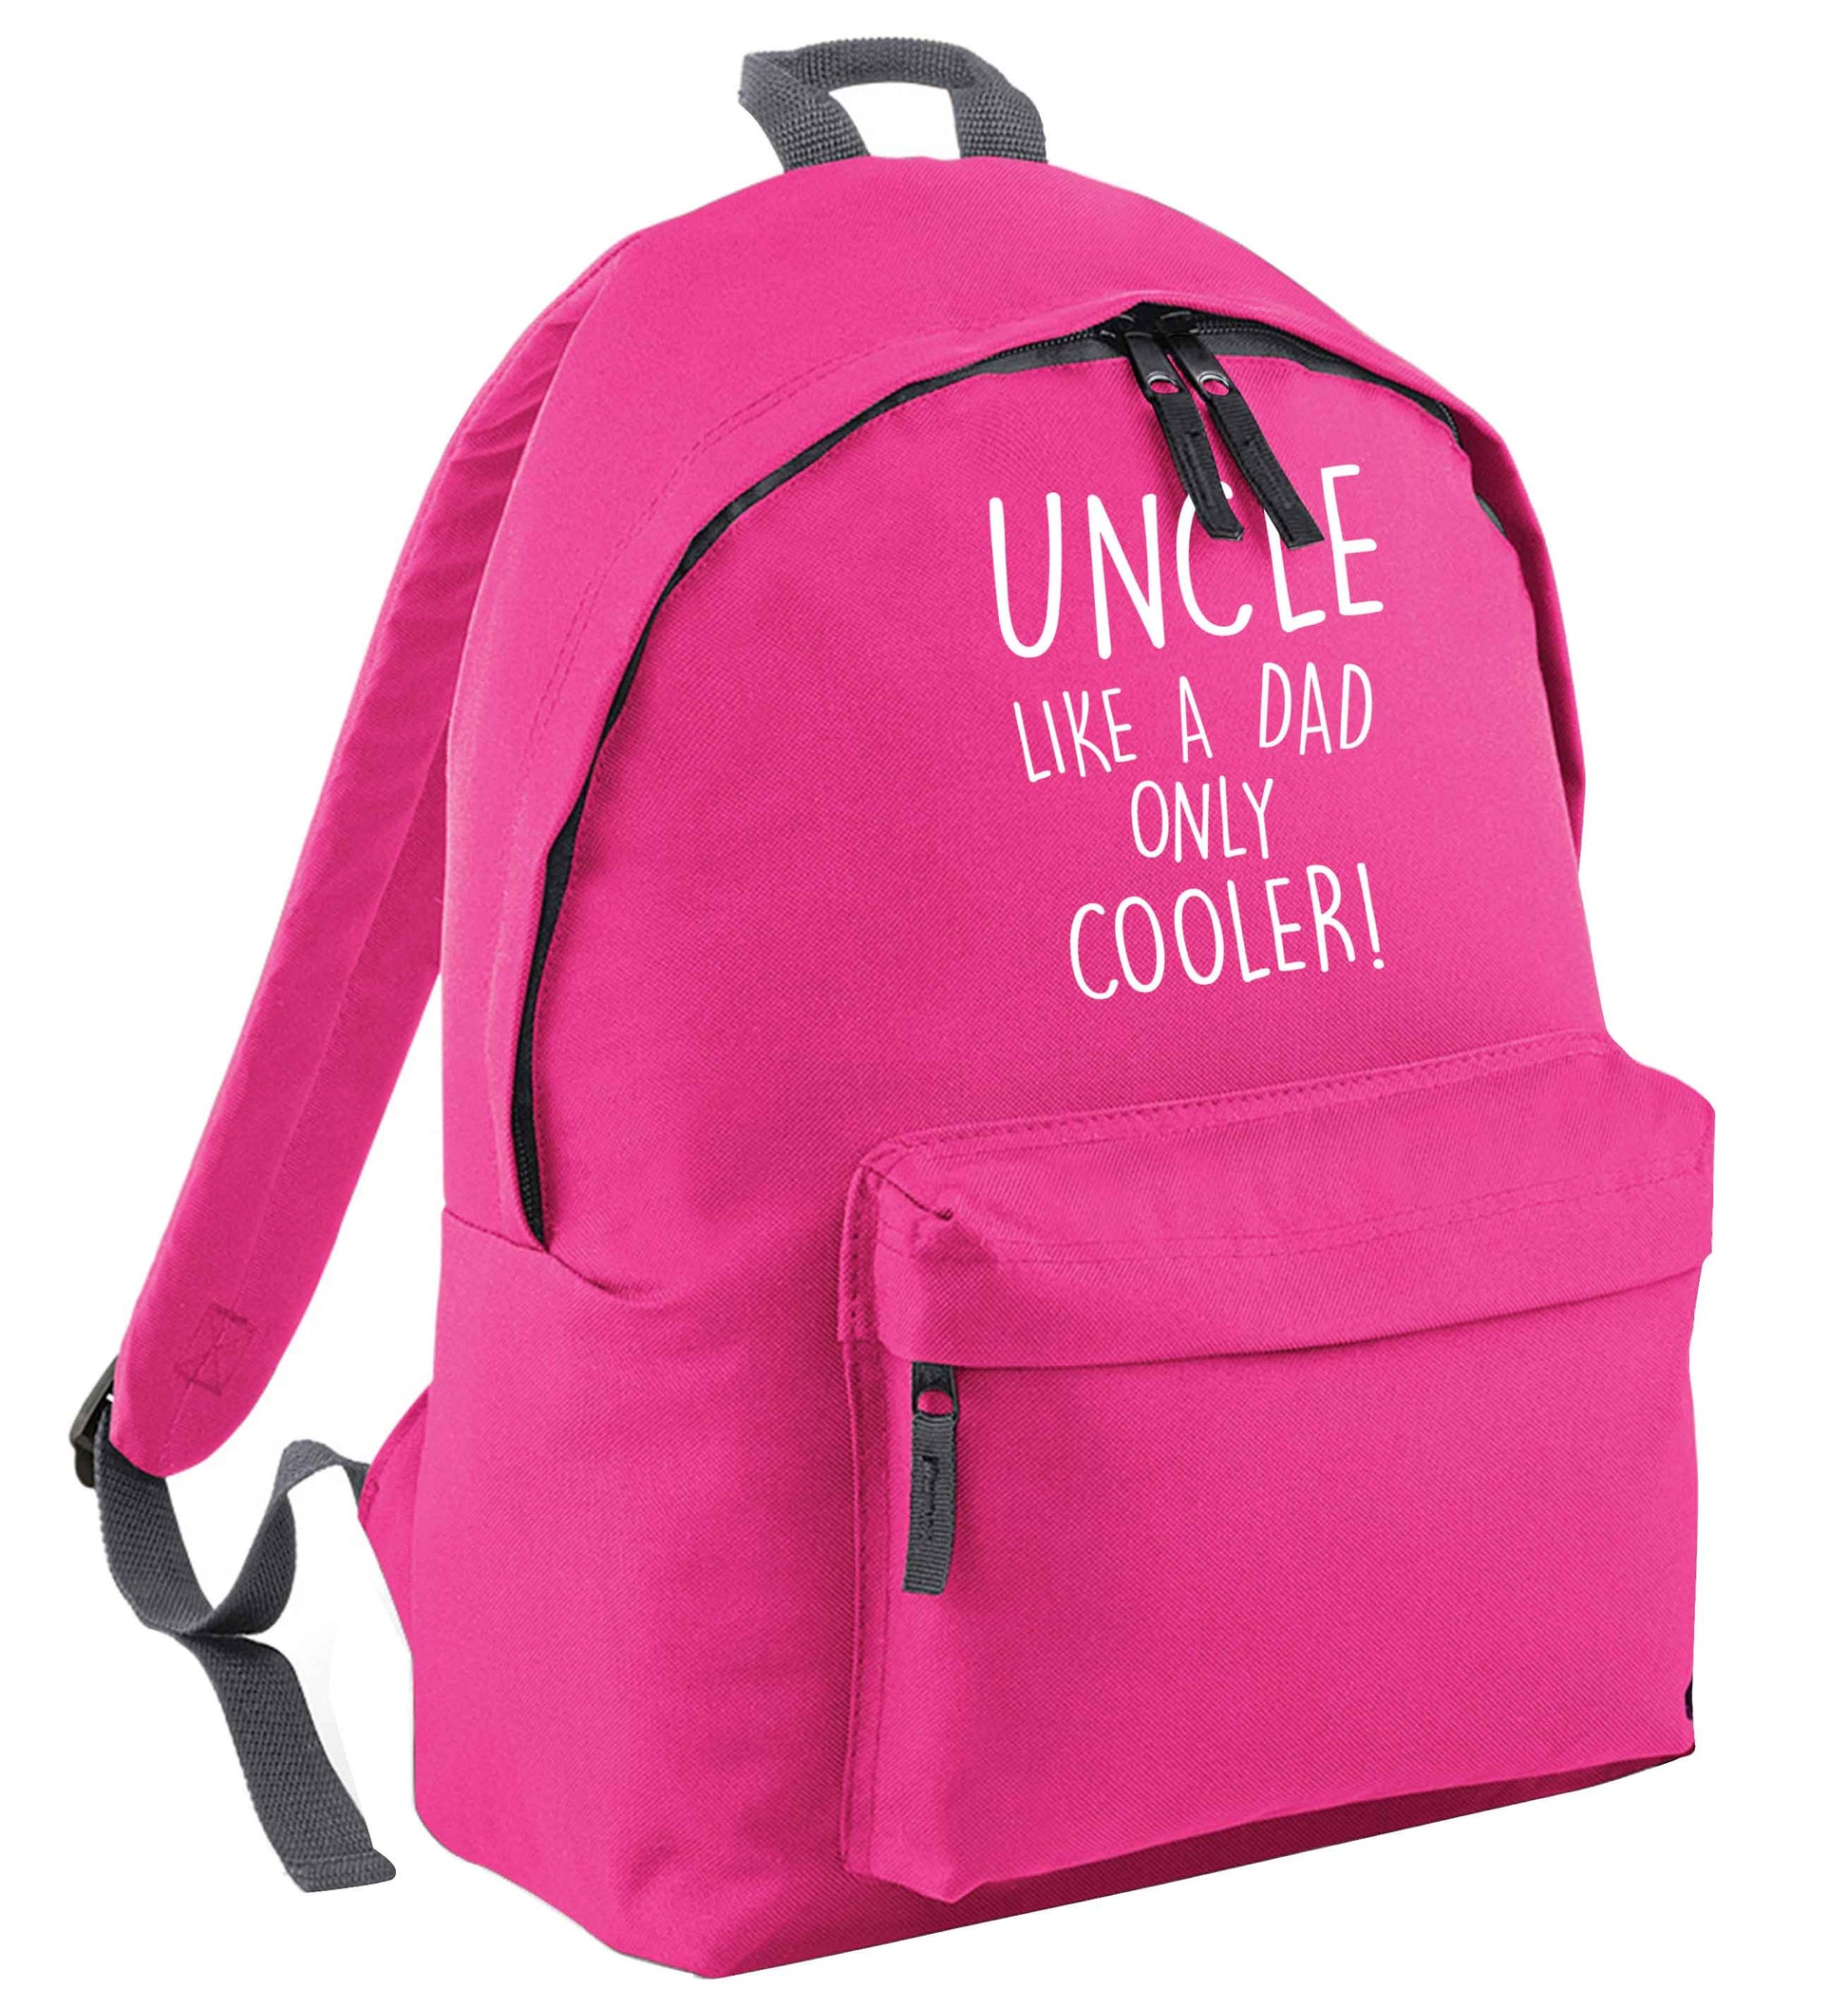 Uncle like a dad only cooler pink adults backpack